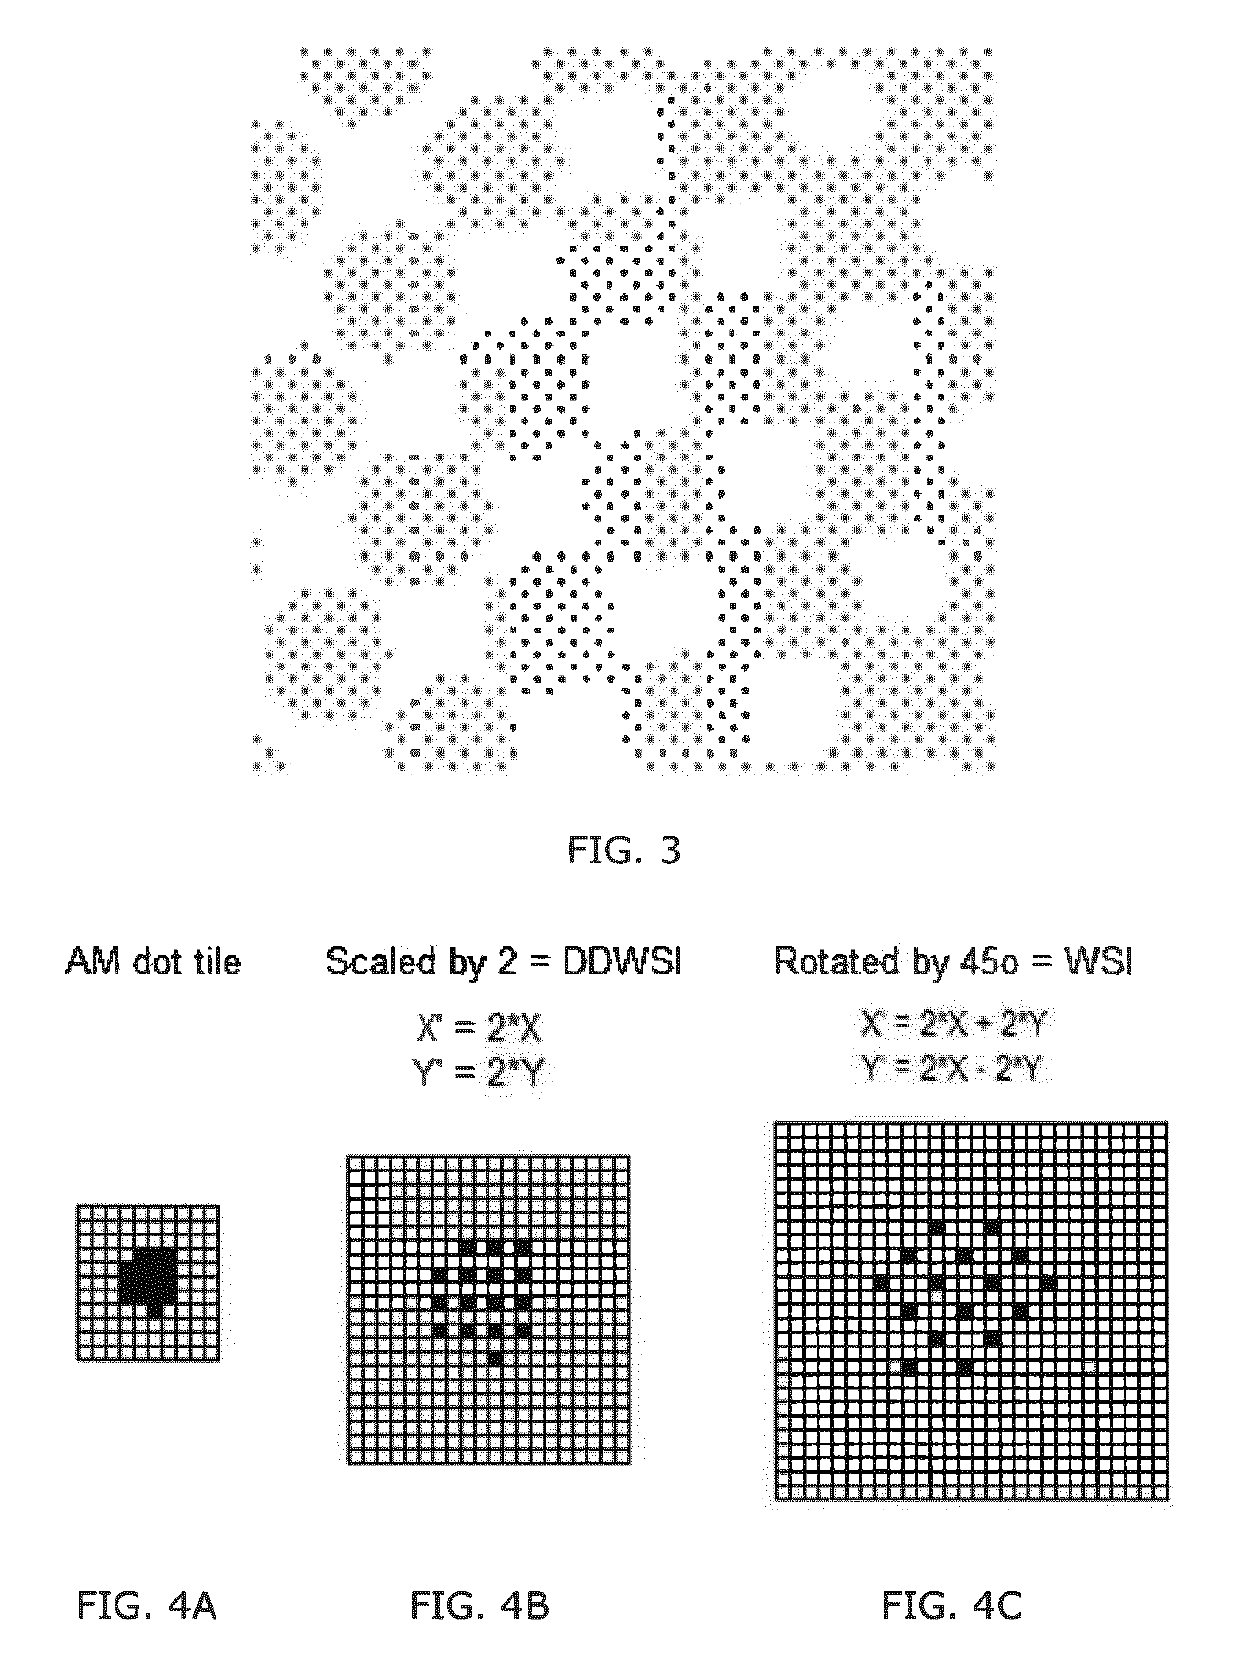 Method for smoother tonal response in flexographic printing